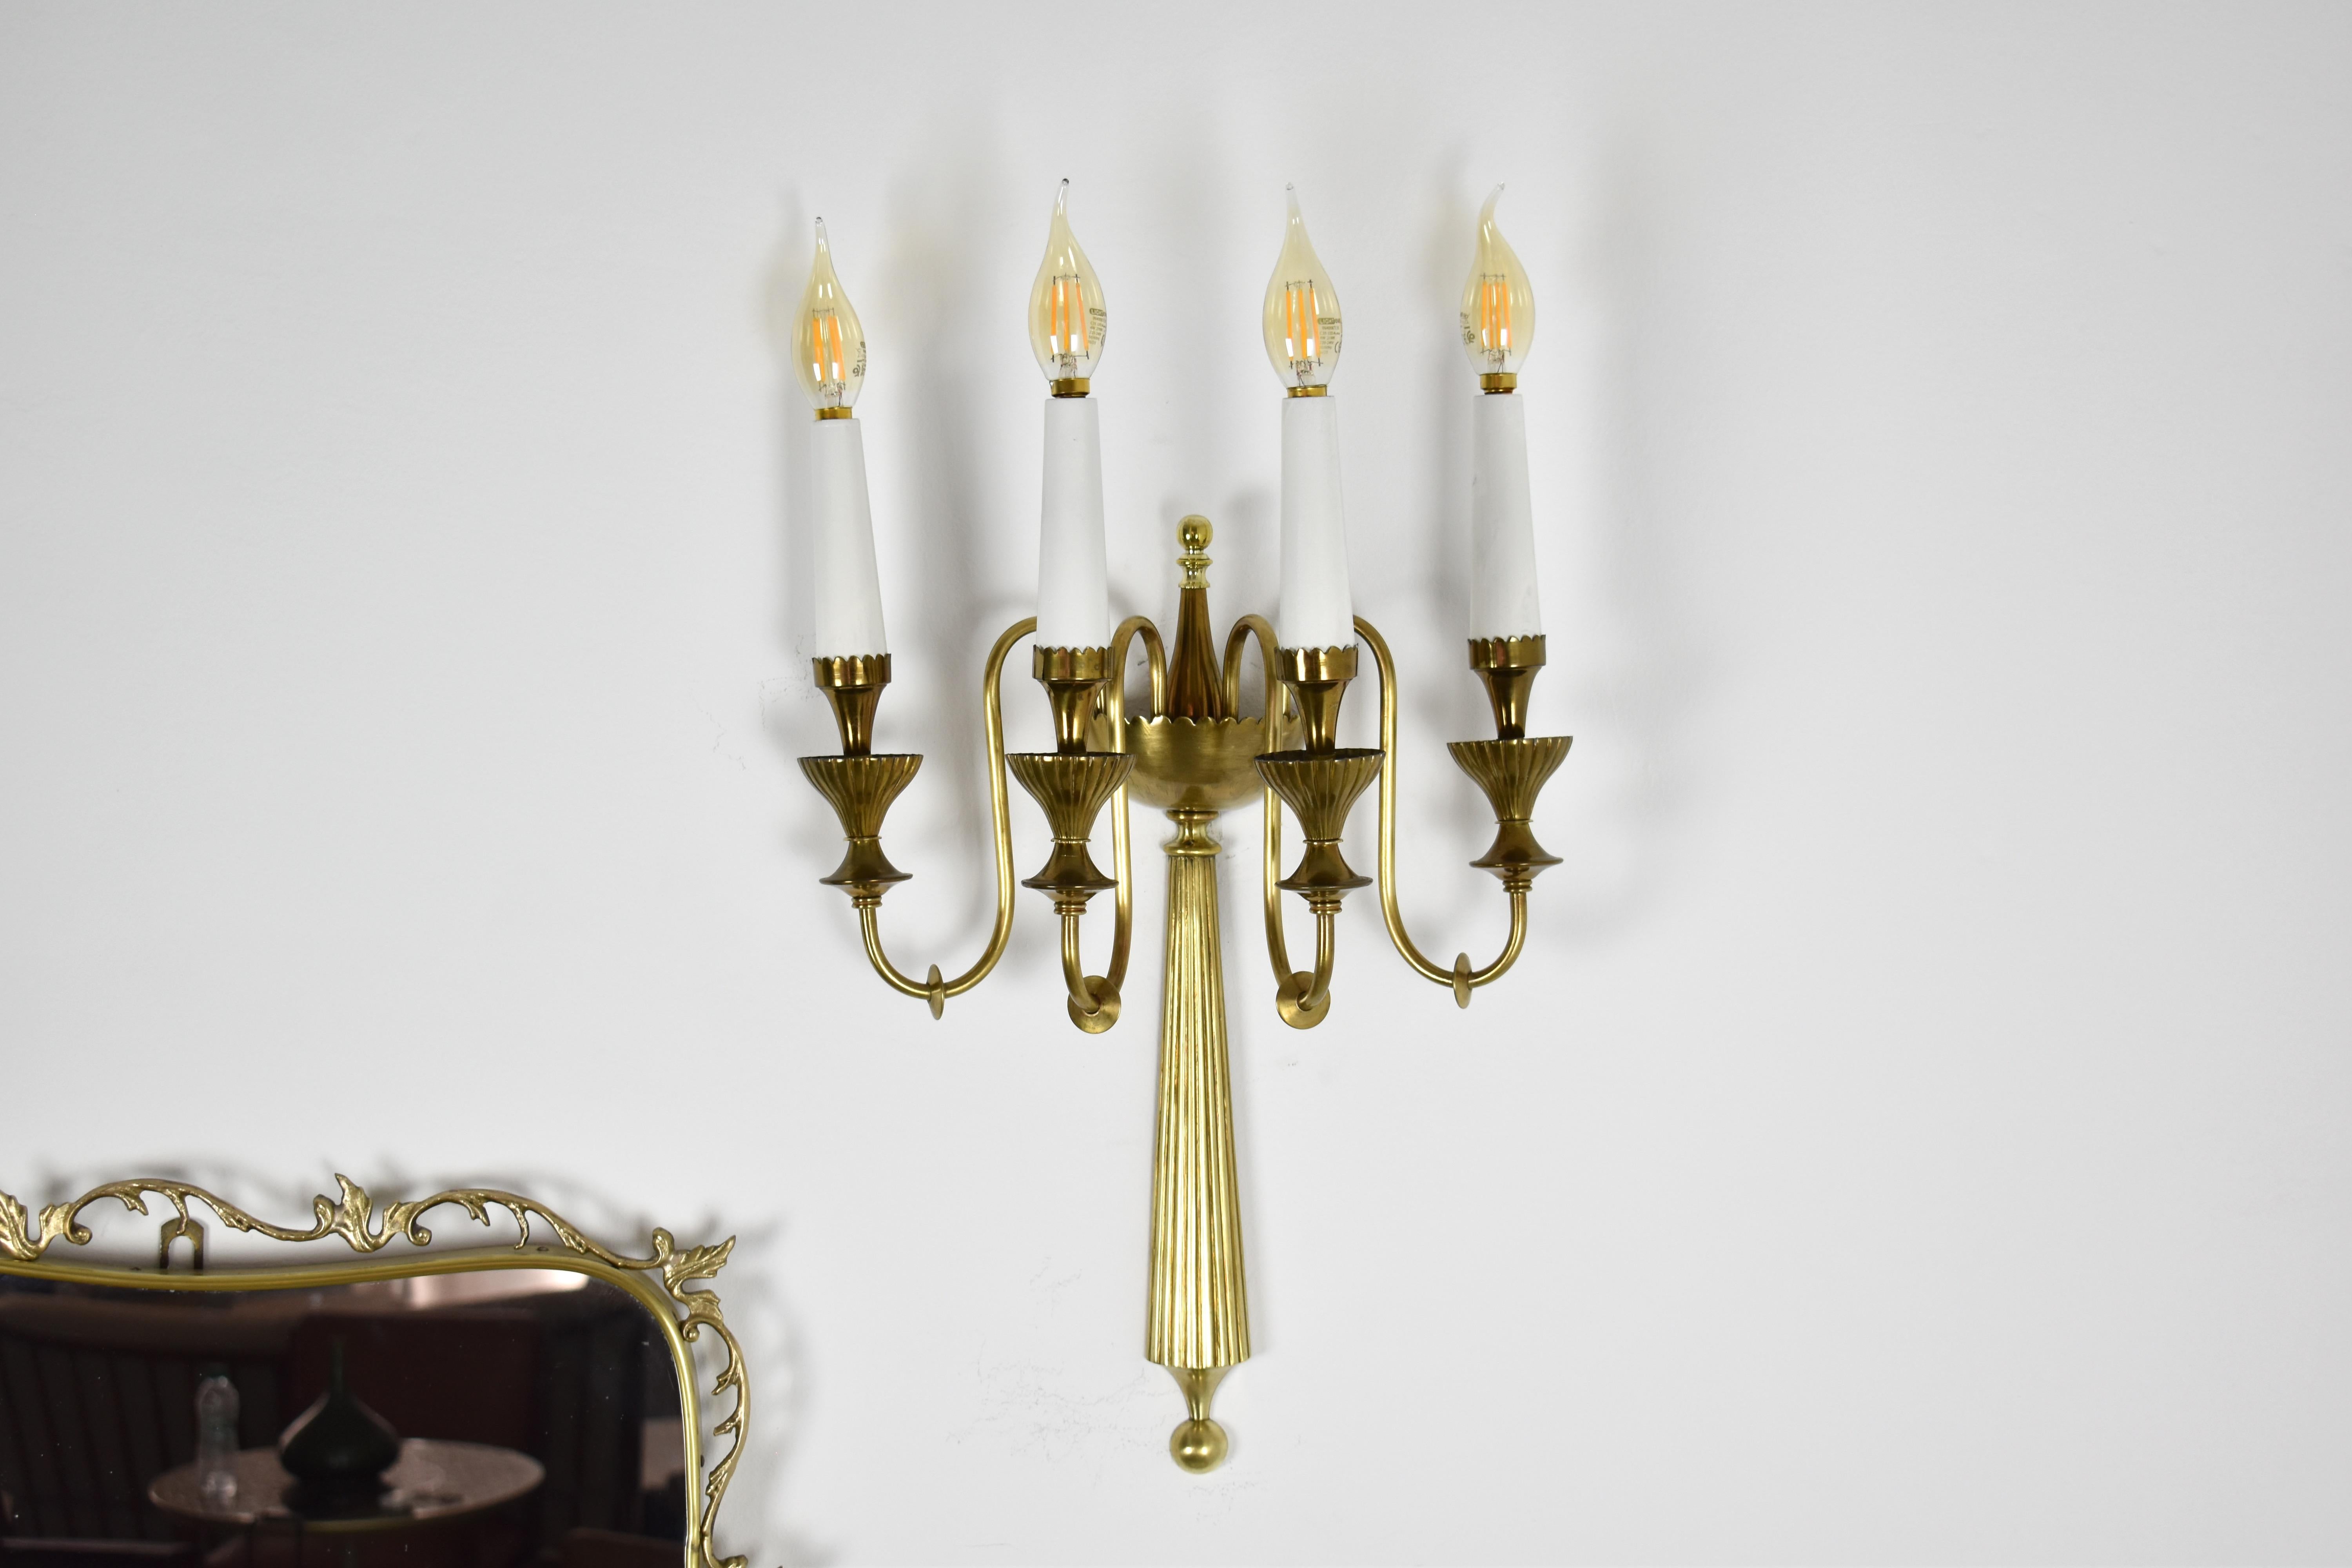 Pair of Four-Light Italian Brass Candelabra Sconces, 1940s In Good Condition For Sale In Paris, FR